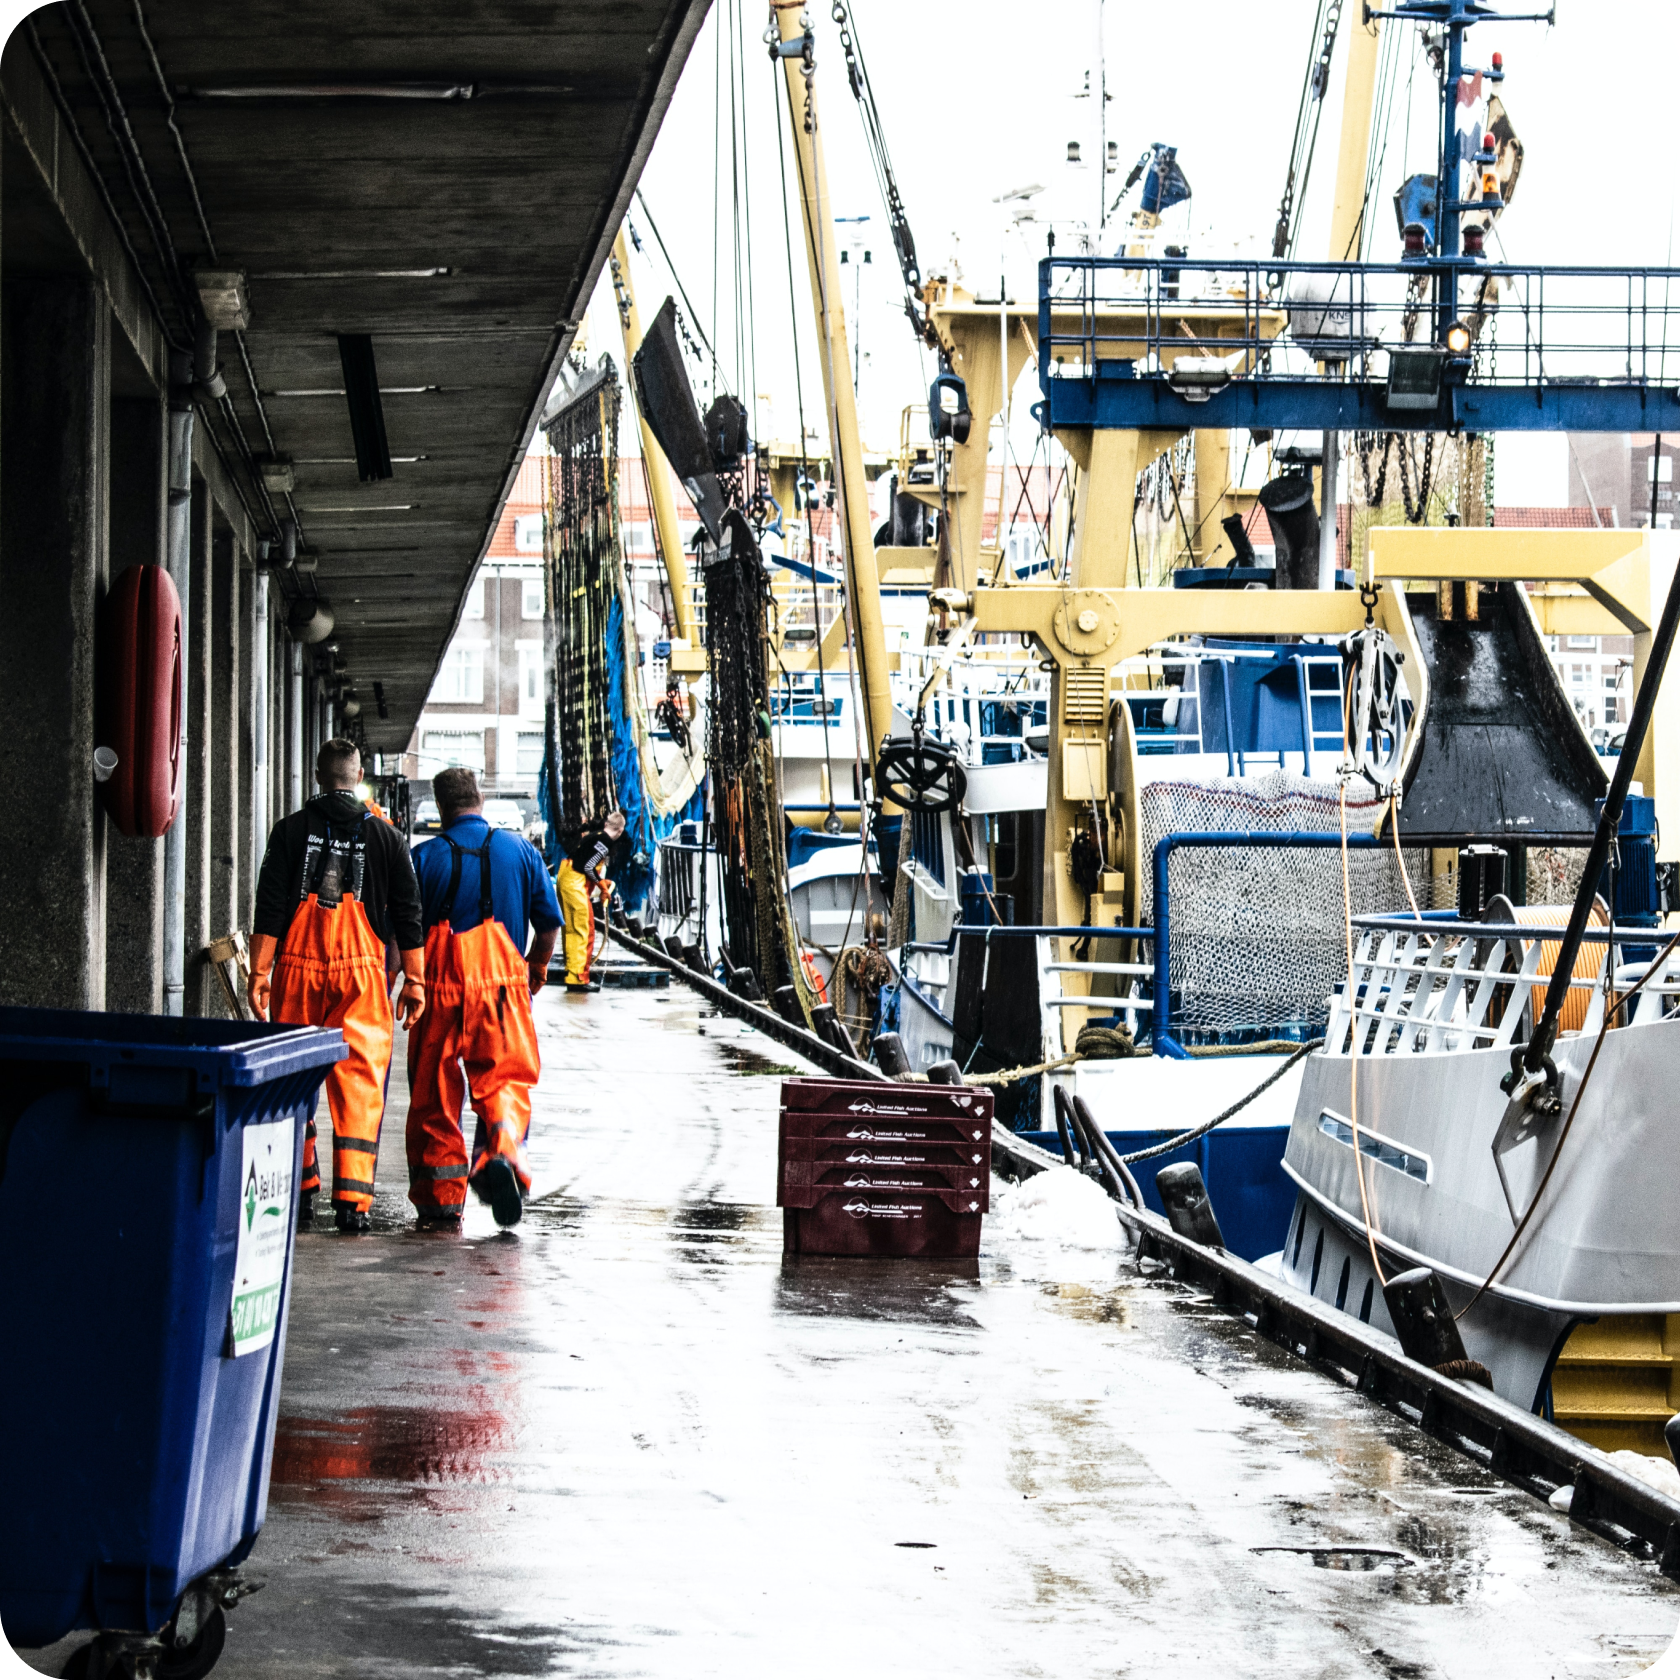 Two fisherman workers on the deck of a port.